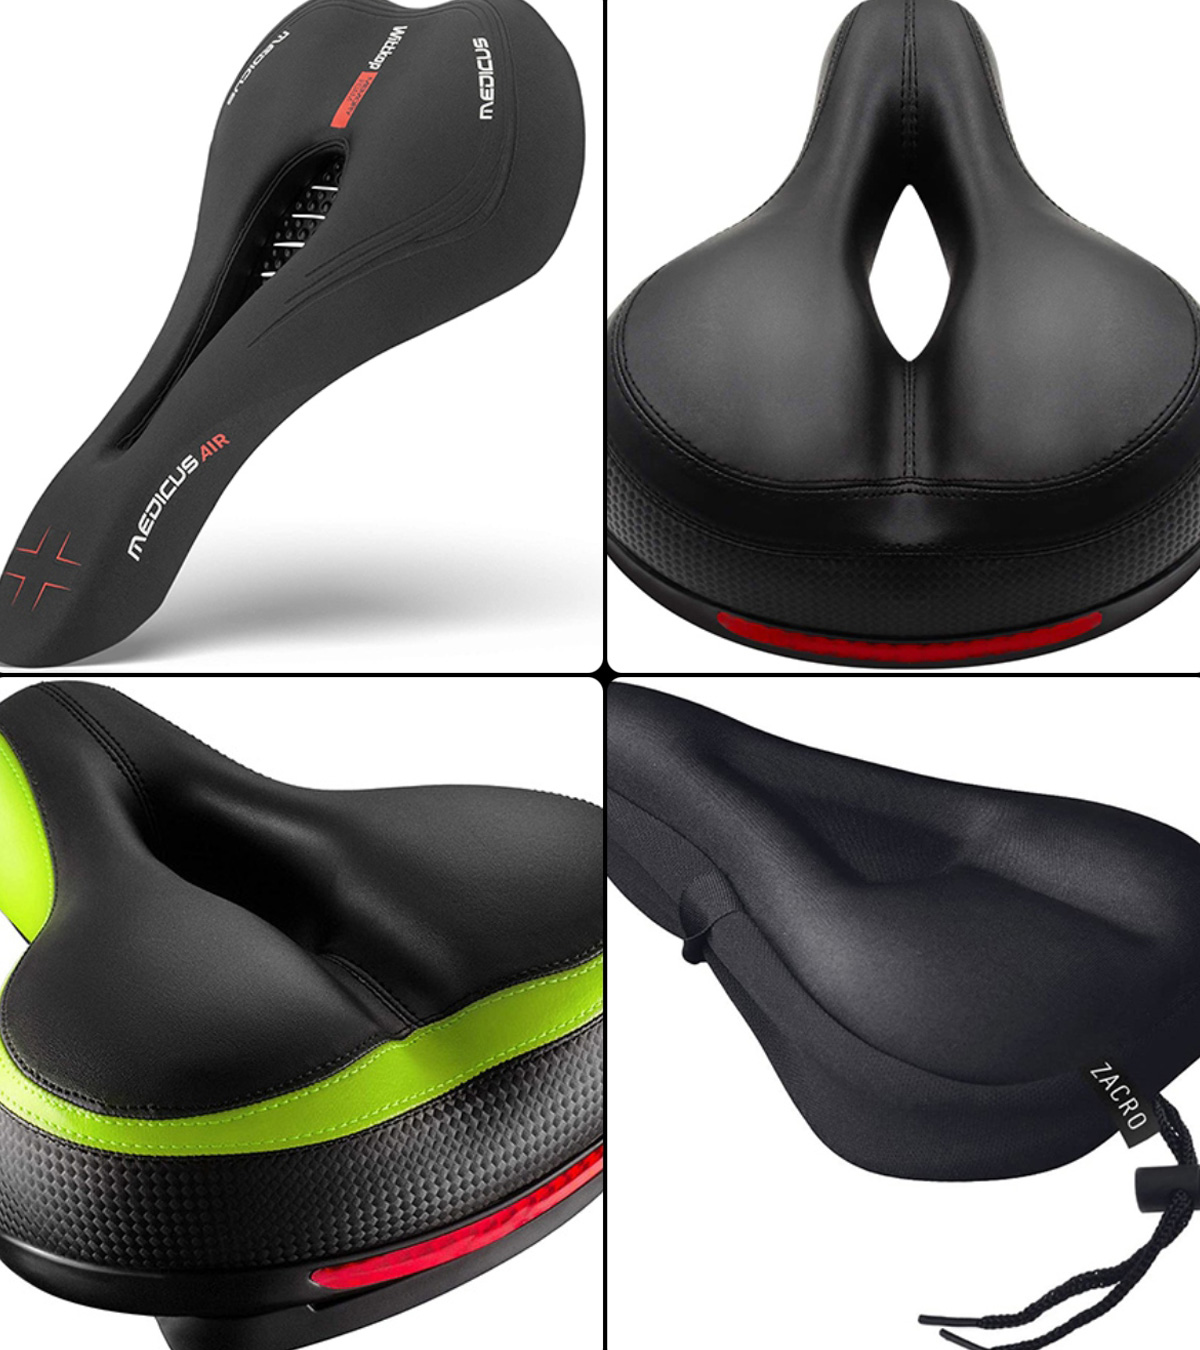 BIKEIN PRO MTB Bike Saddle Breathable Comfortable Bicycle Seat Ergonomics with Central Relief Zone Design